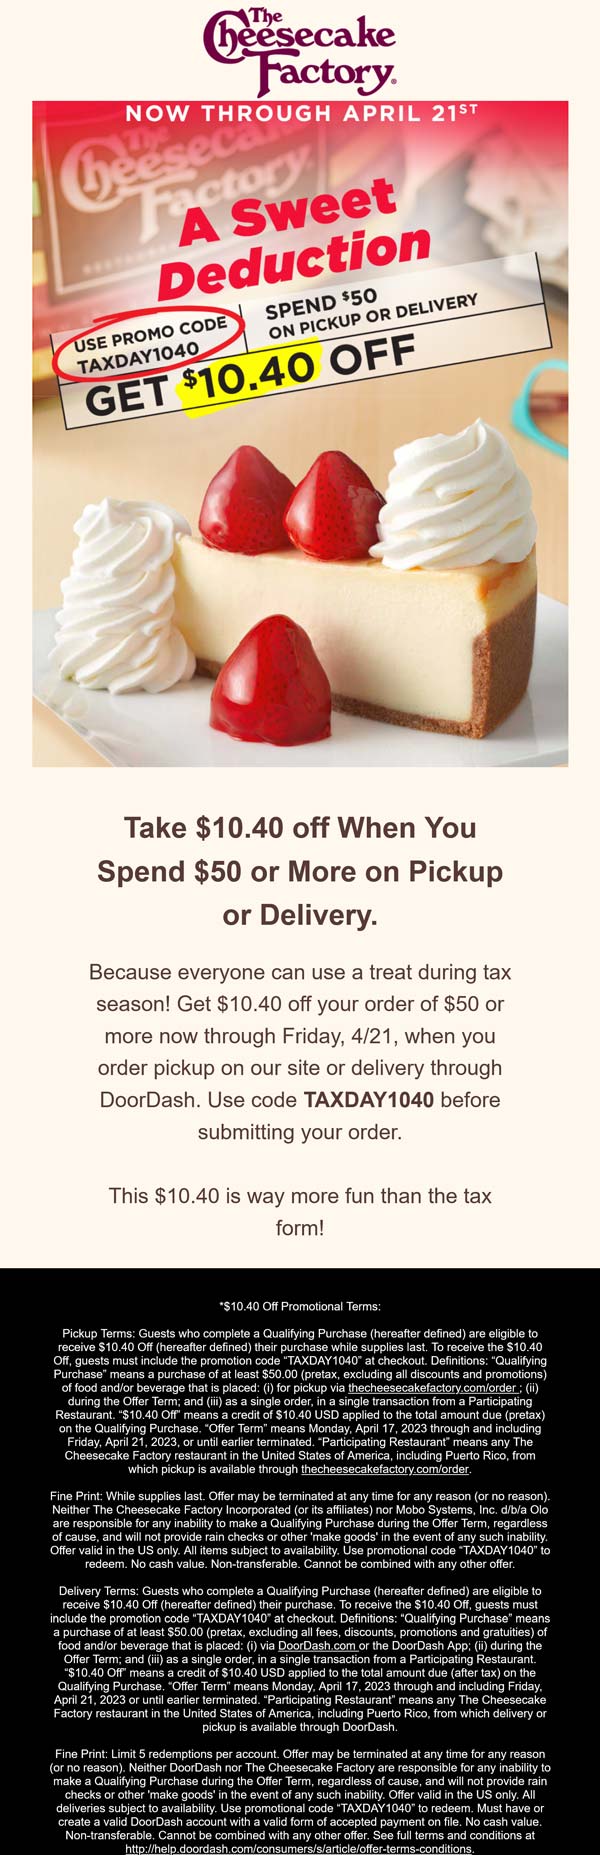 The Cheesecake Factory restaurants Coupon  $10.40 off $50 at The Cheesecake Factory restaurants via promo code TAXDAY1040 #thecheesecakefactory 